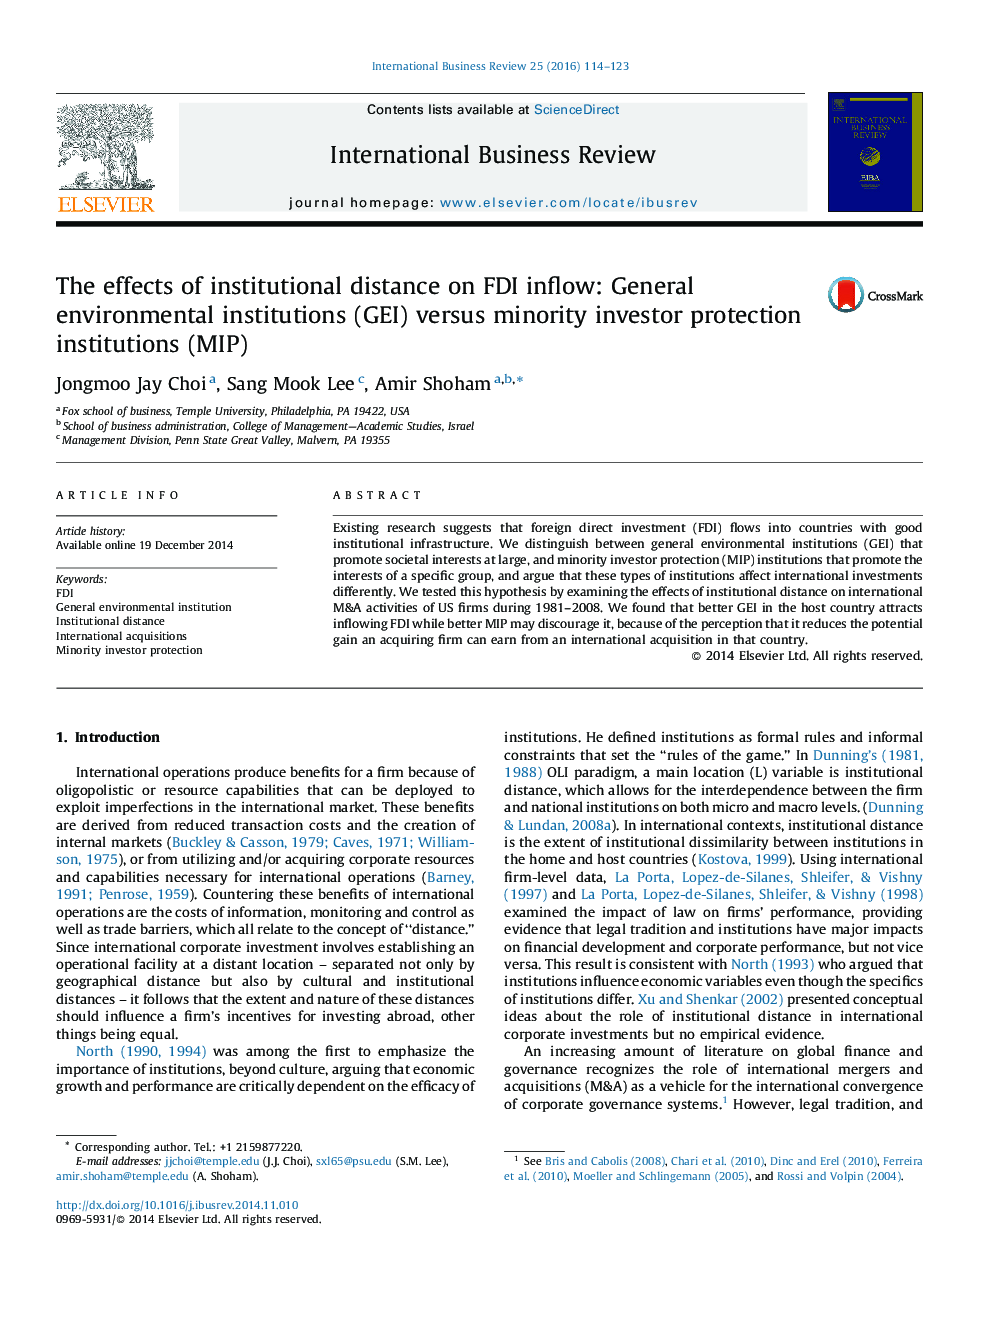 The effects of institutional distance on FDI inflow: General environmental institutions (GEI) versus minority investor protection institutions (MIP)